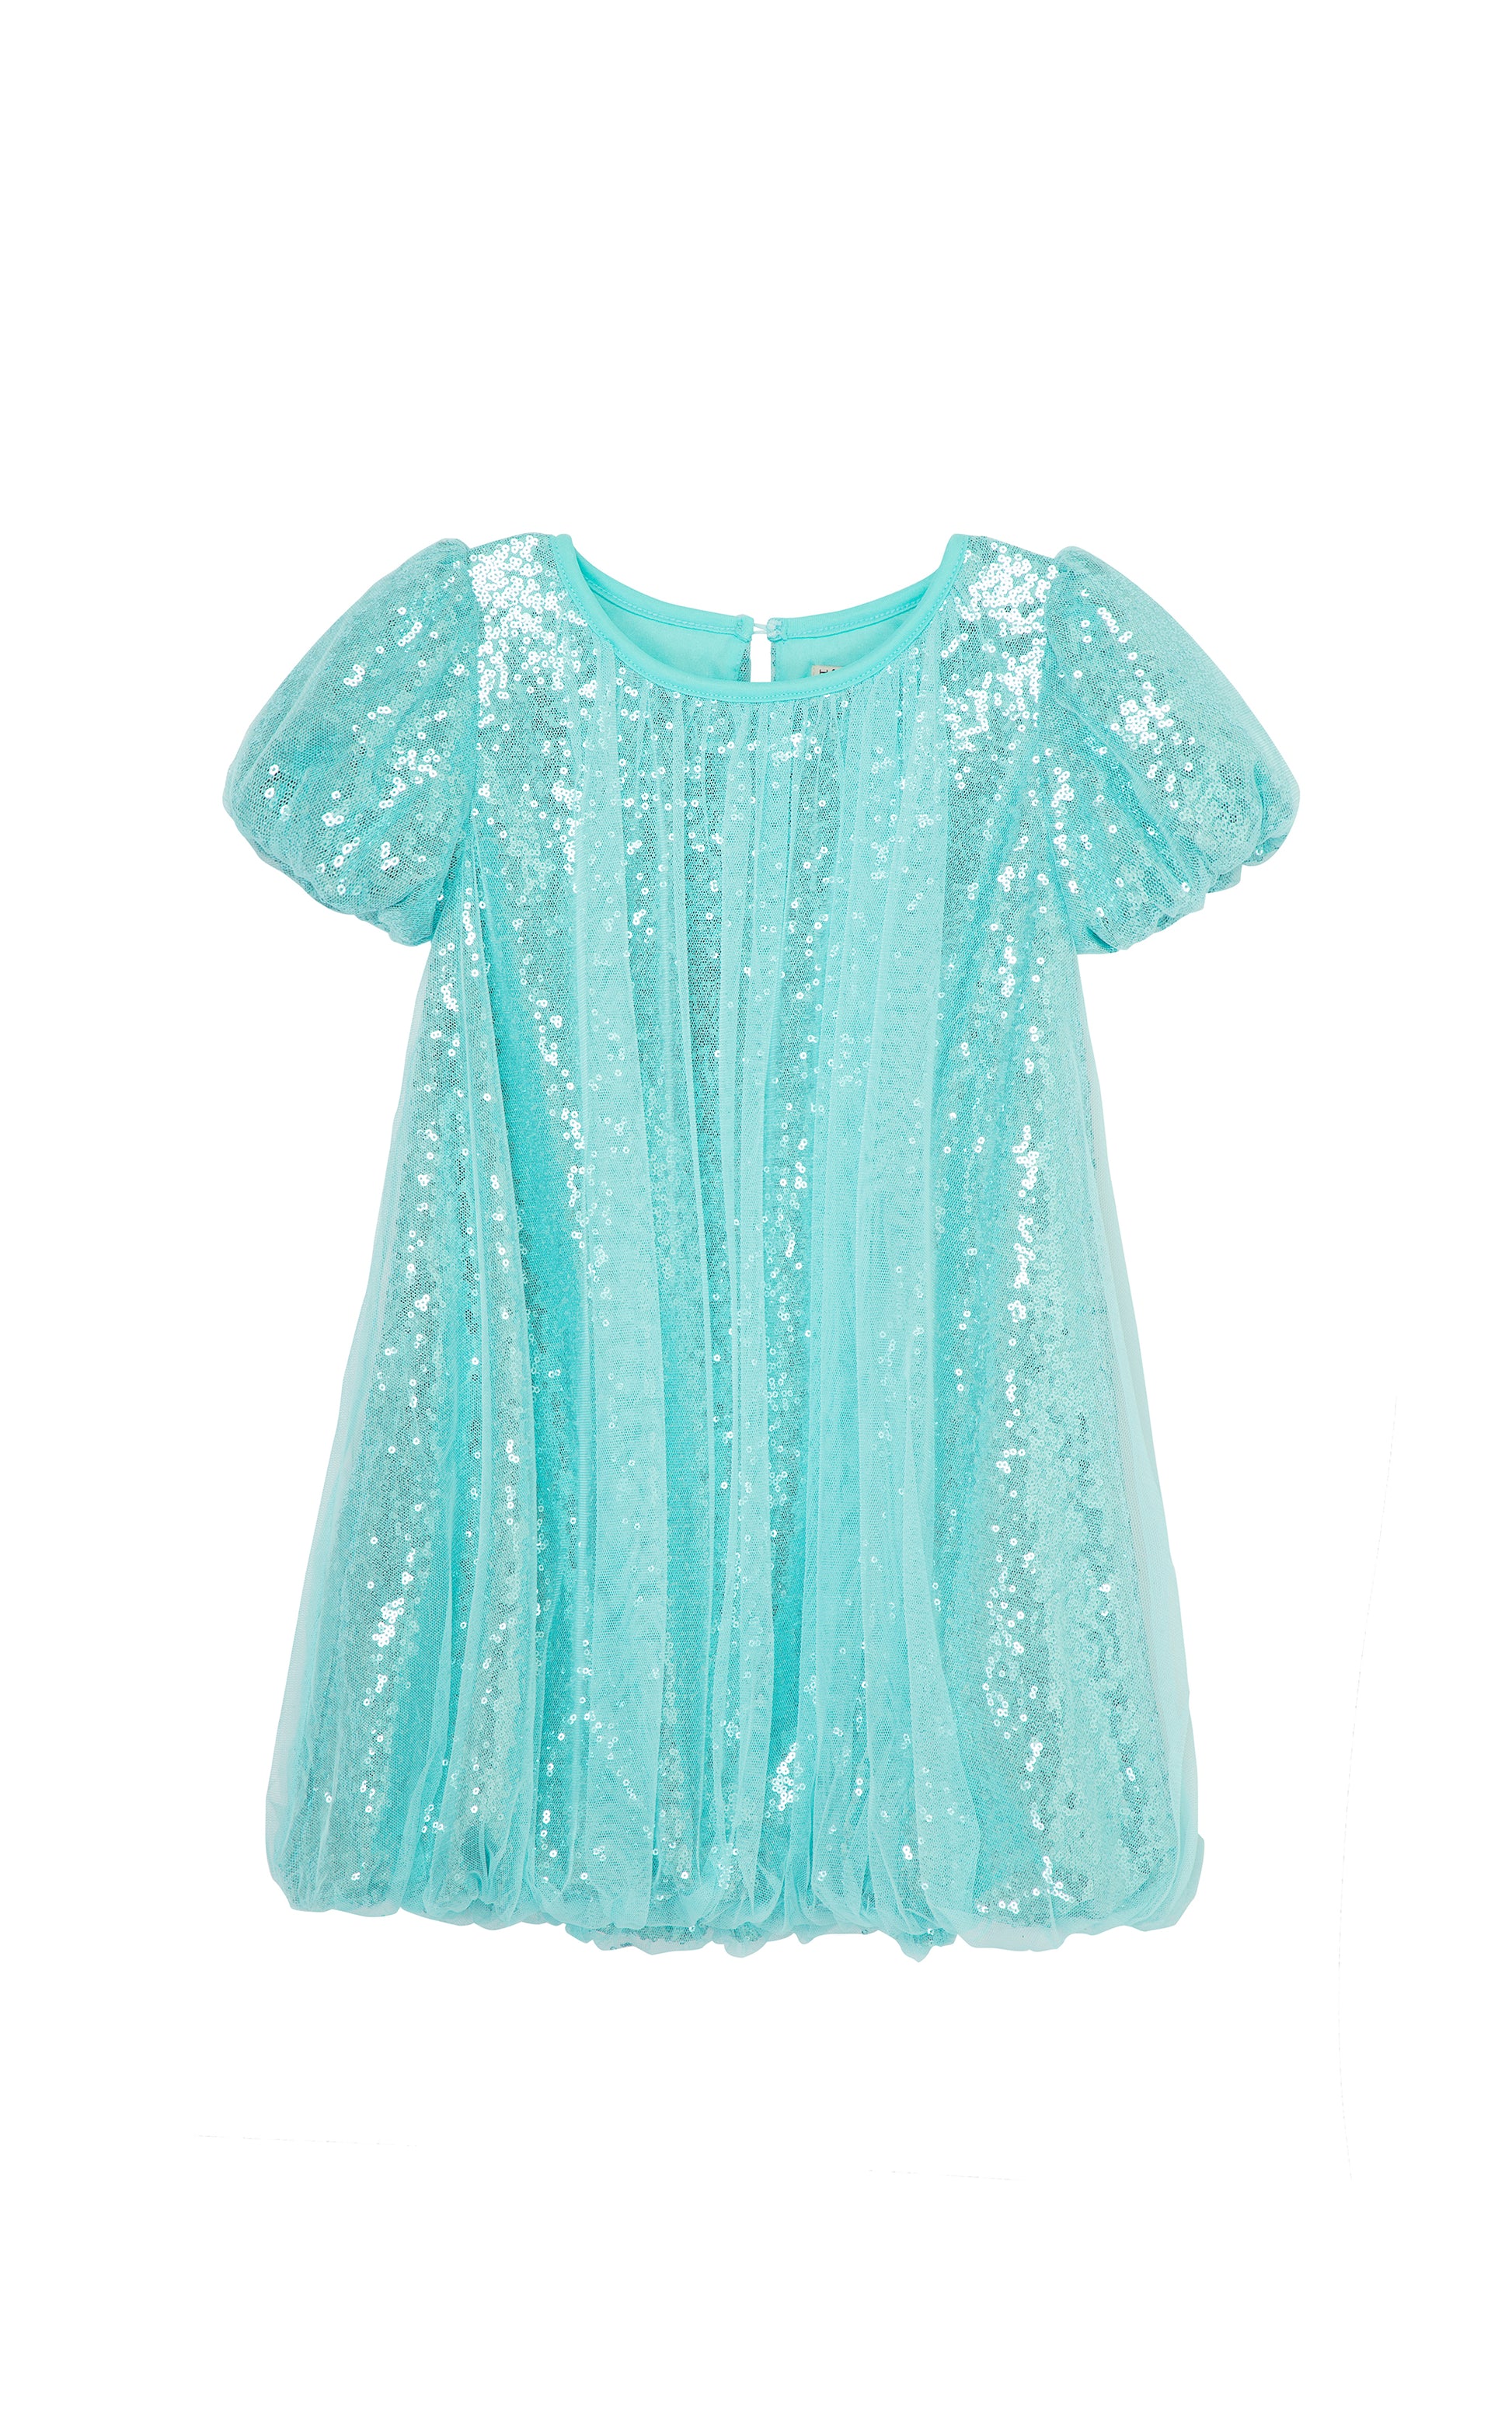 Front view of light blue sequin dress with bubble hem